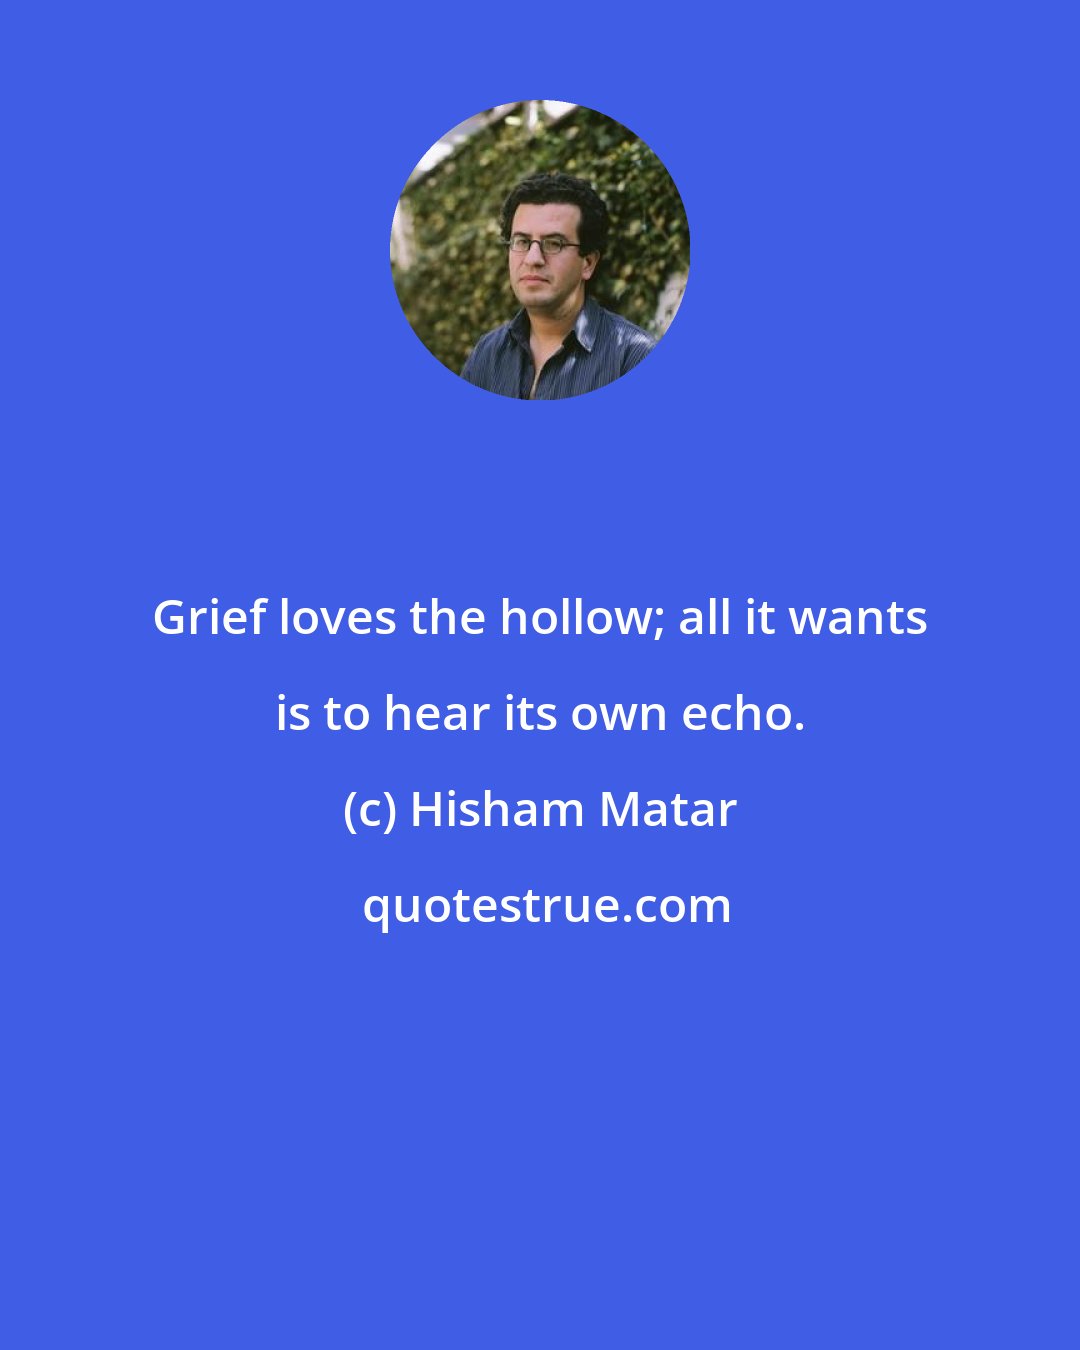 Hisham Matar: Grief loves the hollow; all it wants is to hear its own echo.